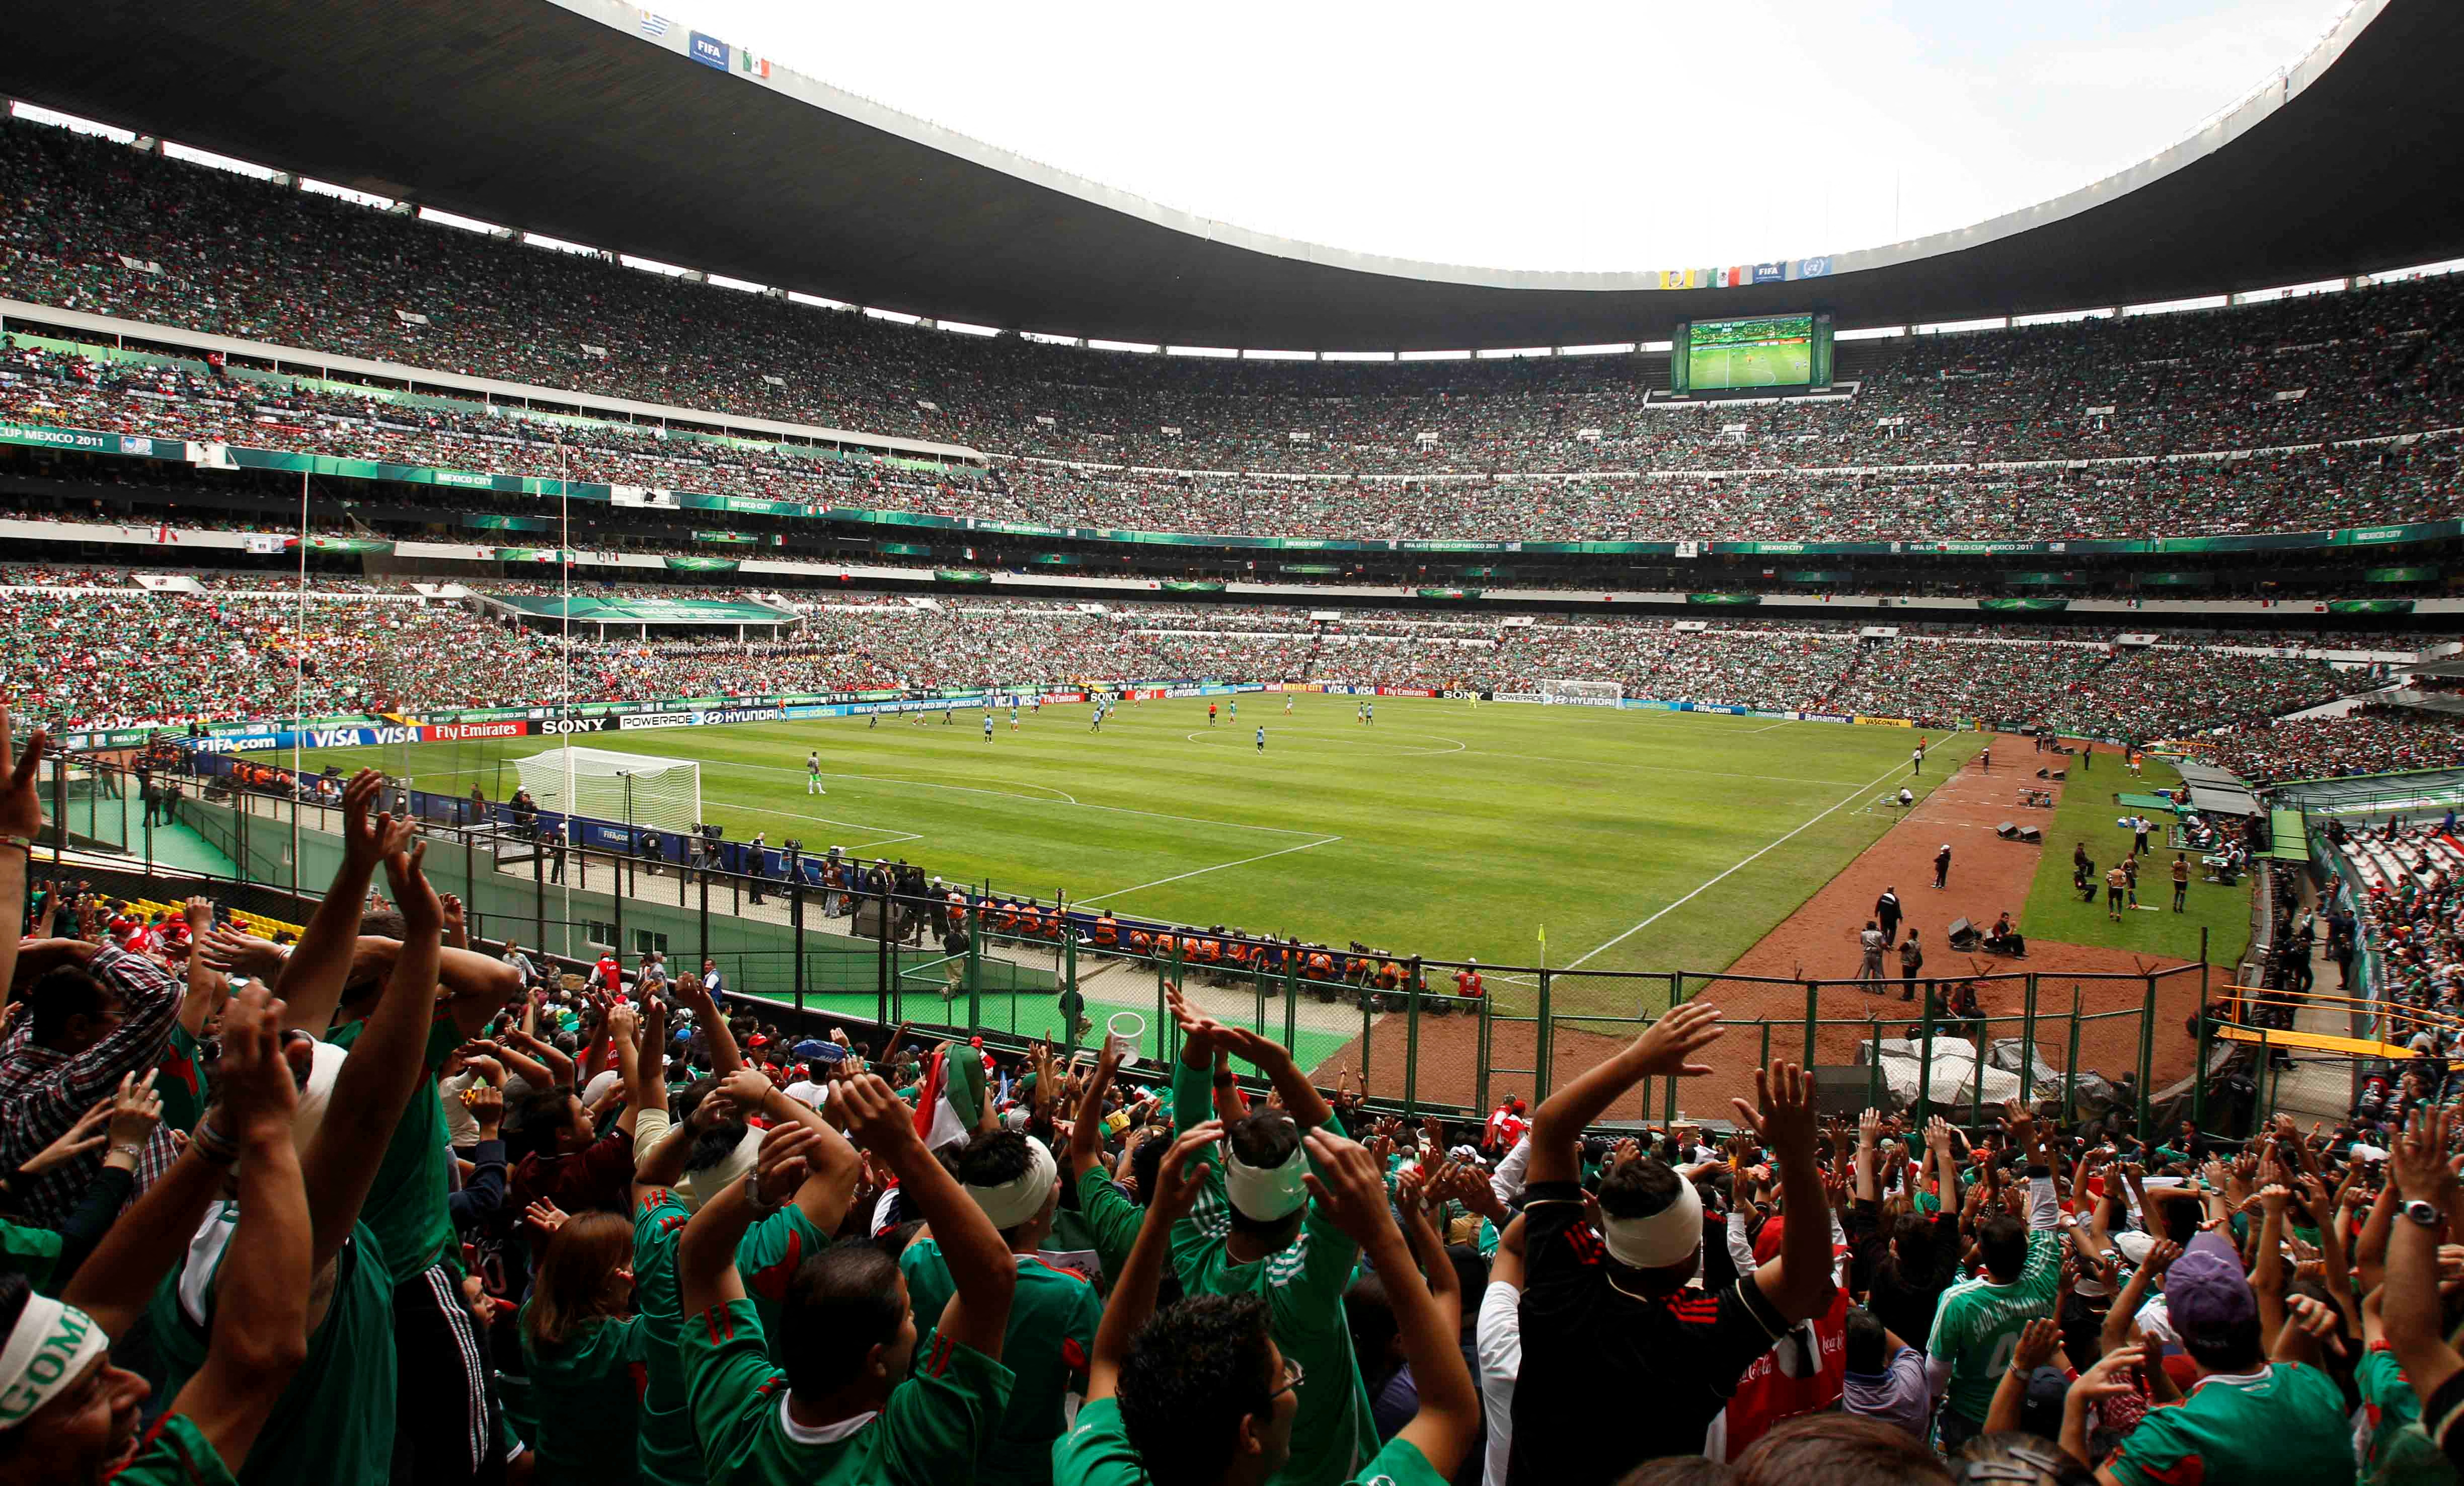 FILE PHOTO: General view of the Azteca stadium during the Uruguay v Mexico FIFA Under 17 World Cup Final in Mexico City, Mexico July 10, 2011.  Mandatory Credit: Action Images / John Sibley via REUTERS/File Photo